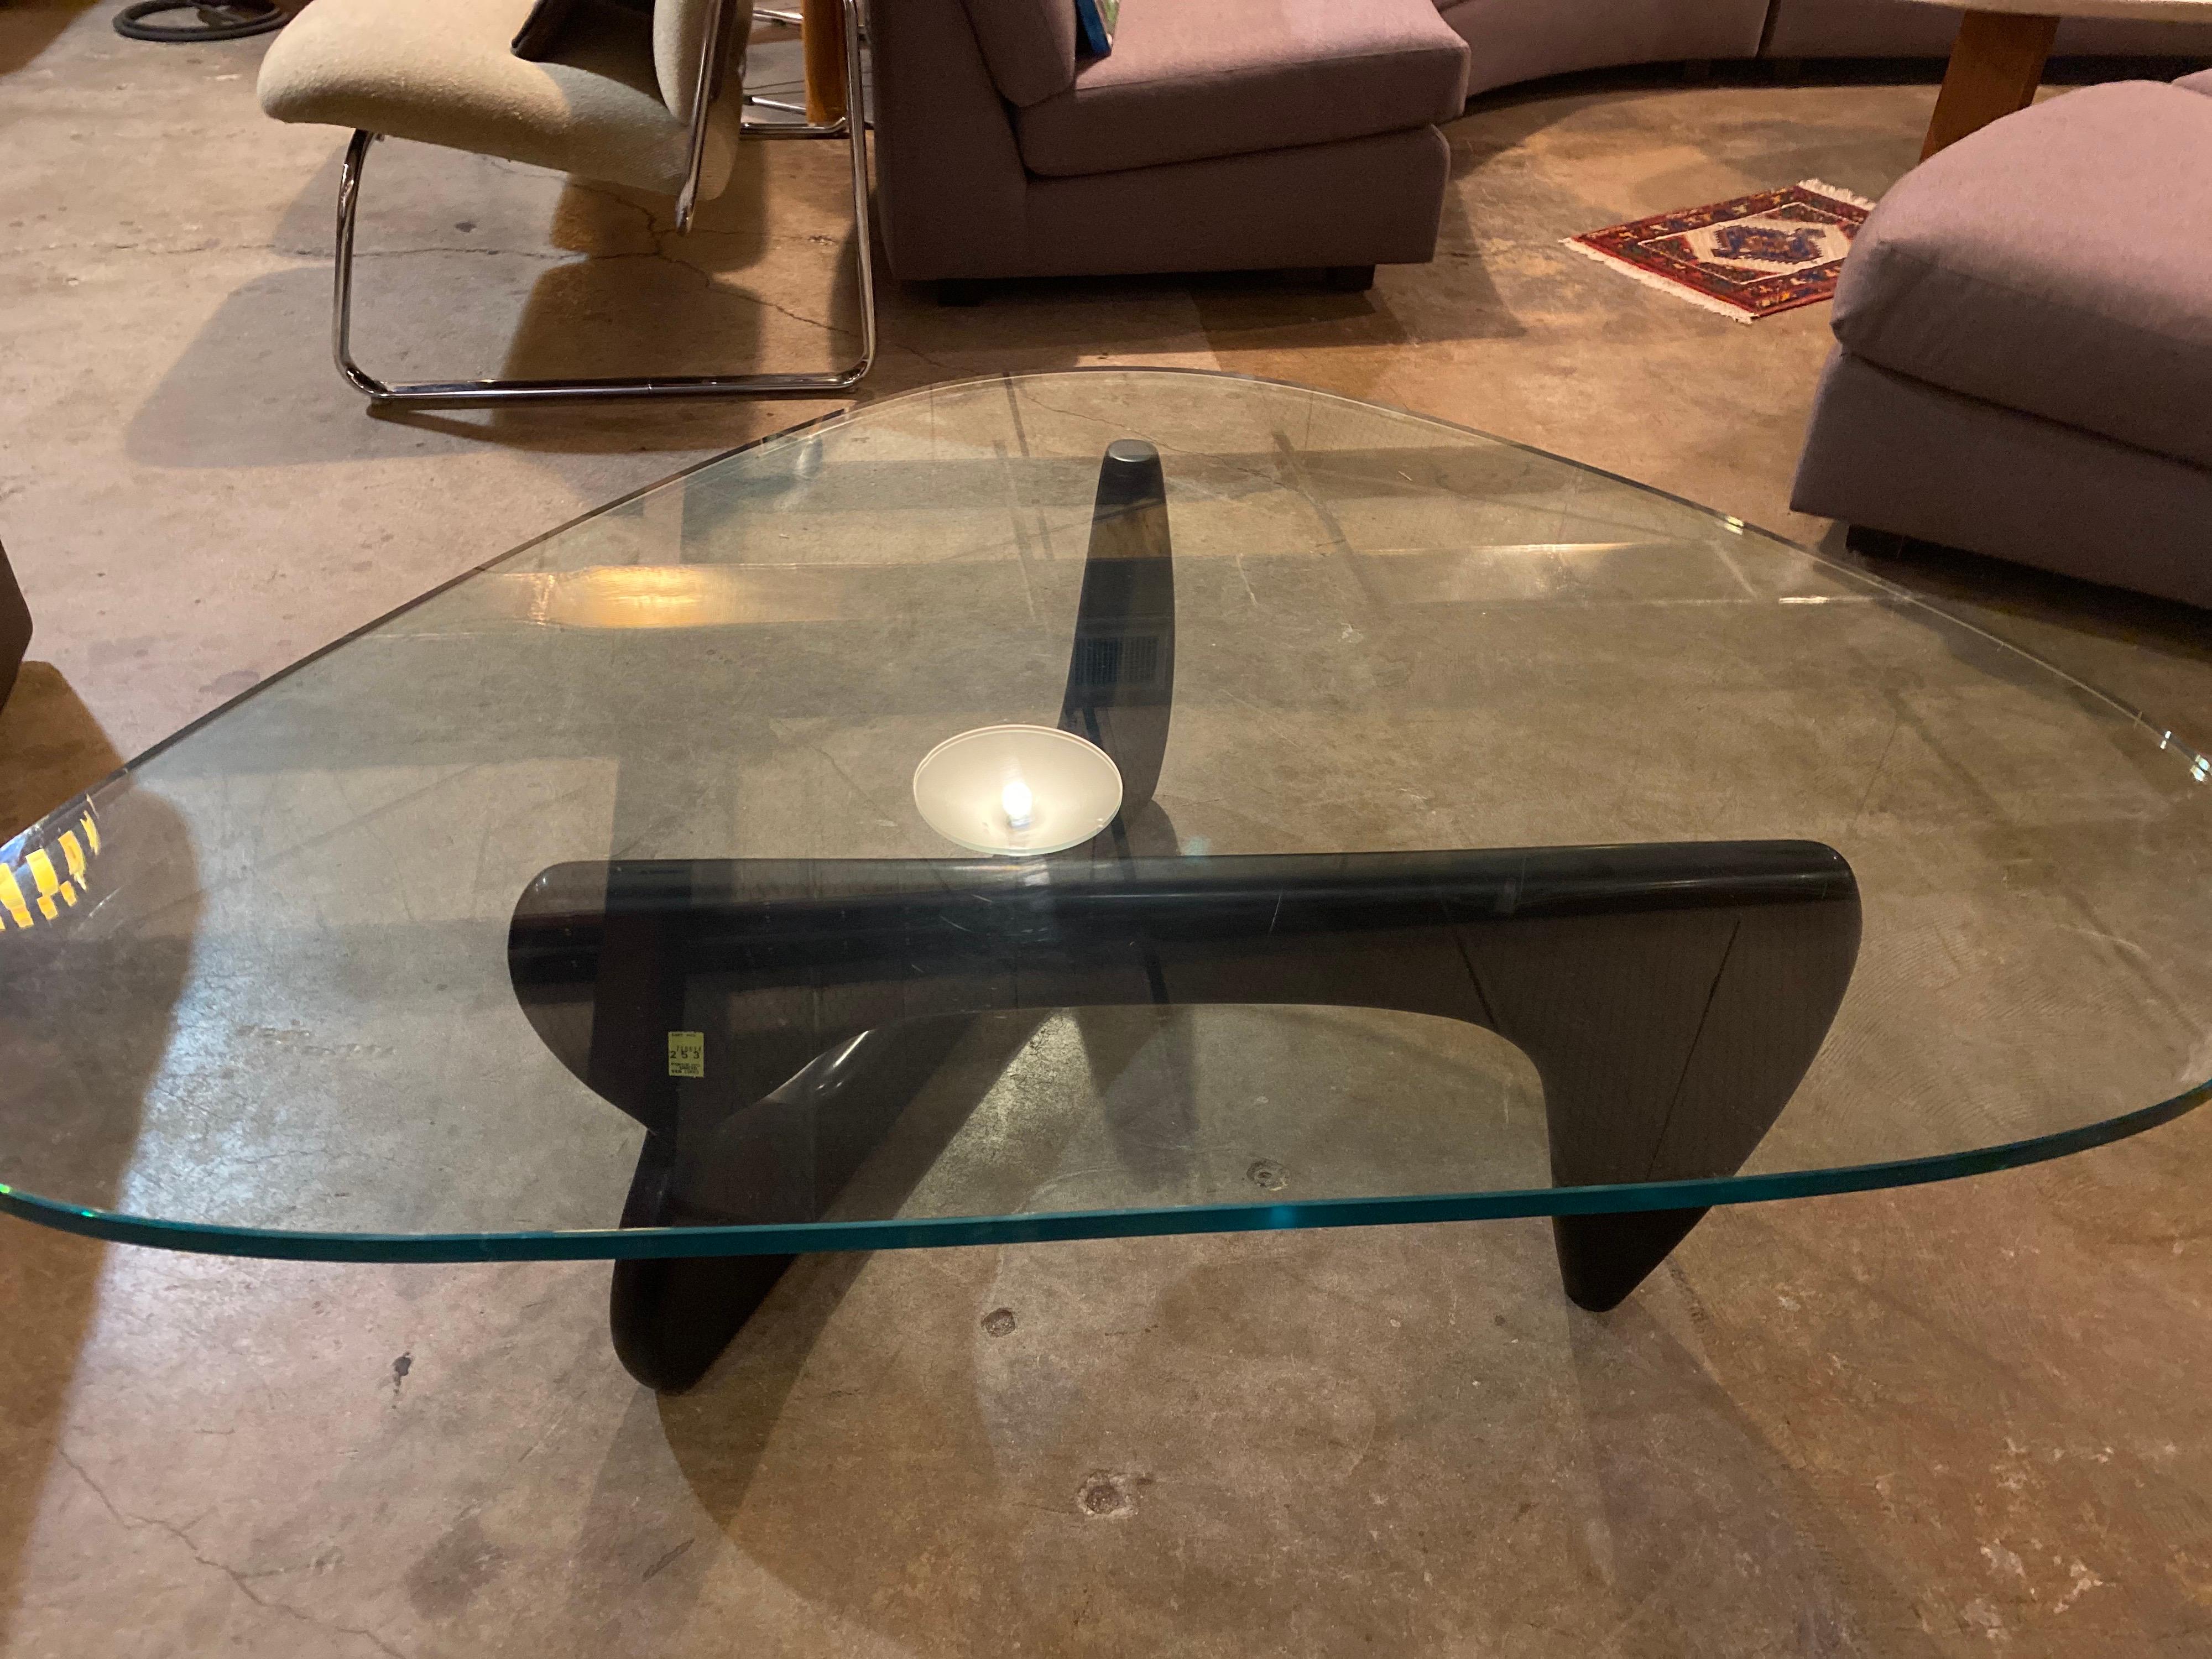 Beautiful mid-century modern coffee table designed by Isamu Noguchi for Herman Miller. 